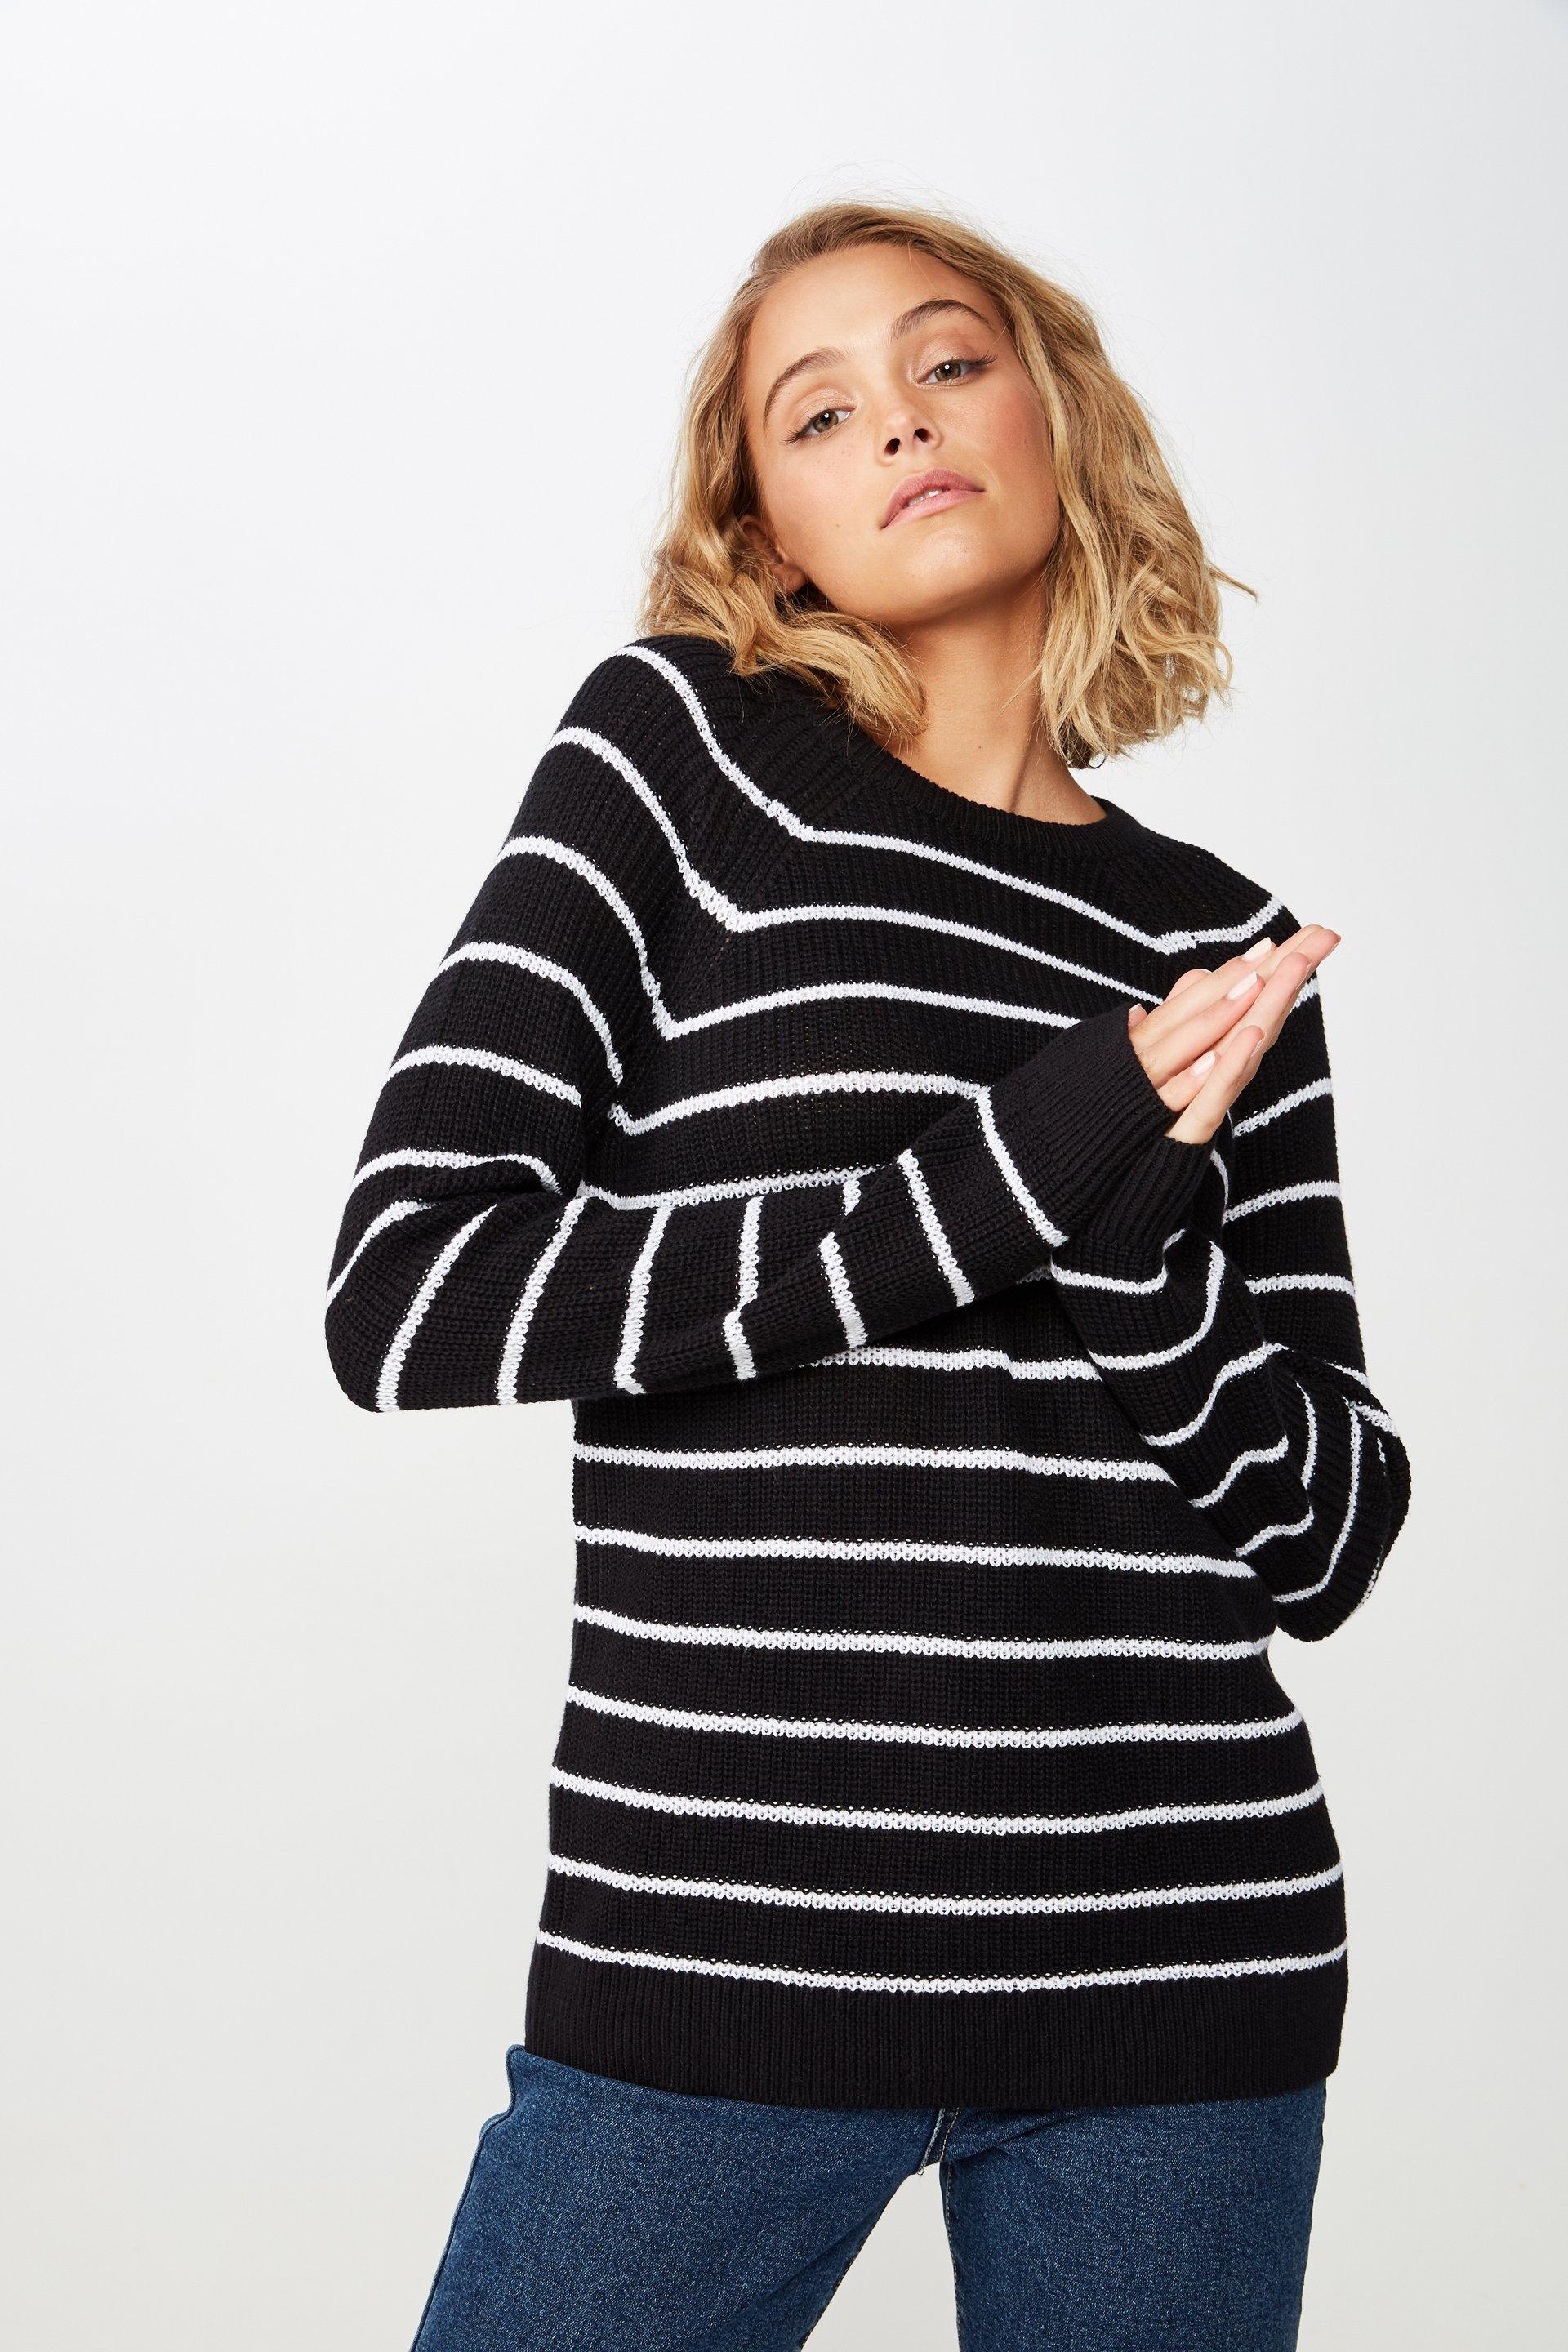 Archy 5 pullover - black and white stripe Cotton On Knitwear ...